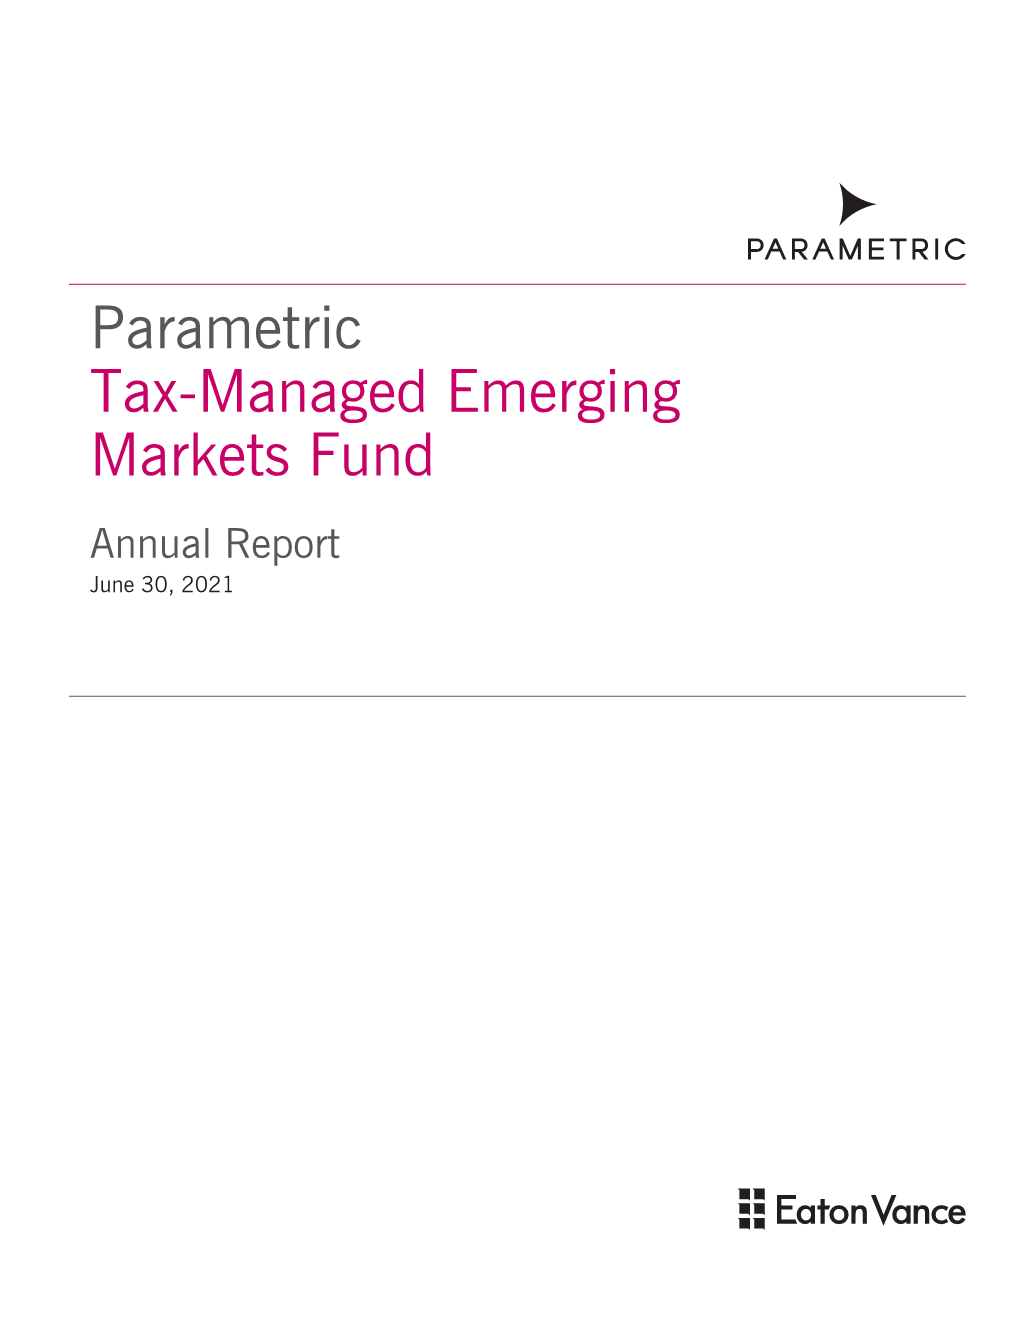 Parametric Tax-Managed Emerging Markets Fund Annual Report June 30, 2021 Commodity Futures Trading Commission Registration